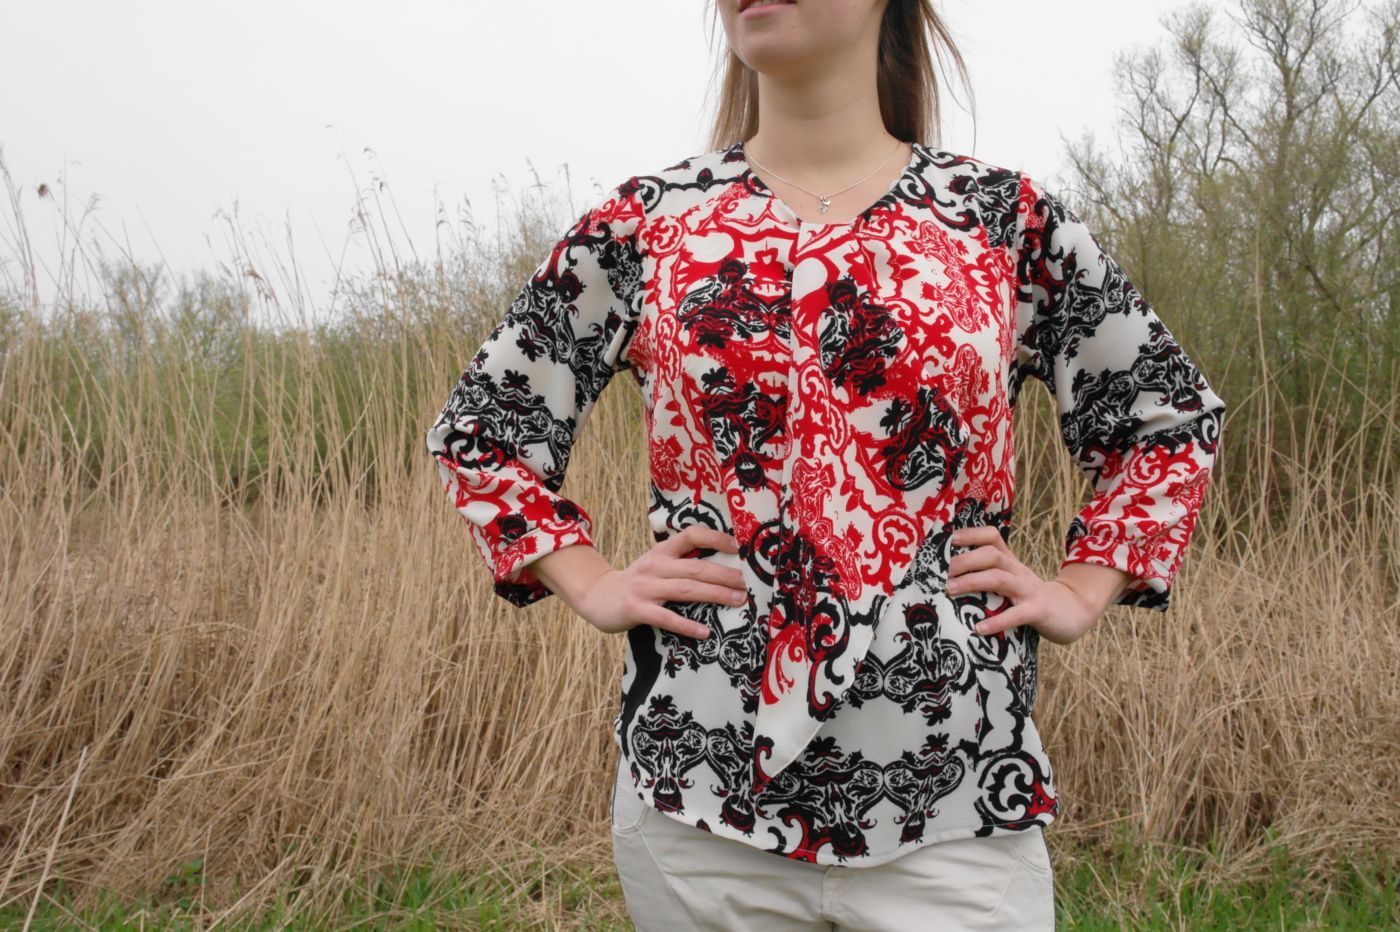 Cosette Blouse by Sewingridd